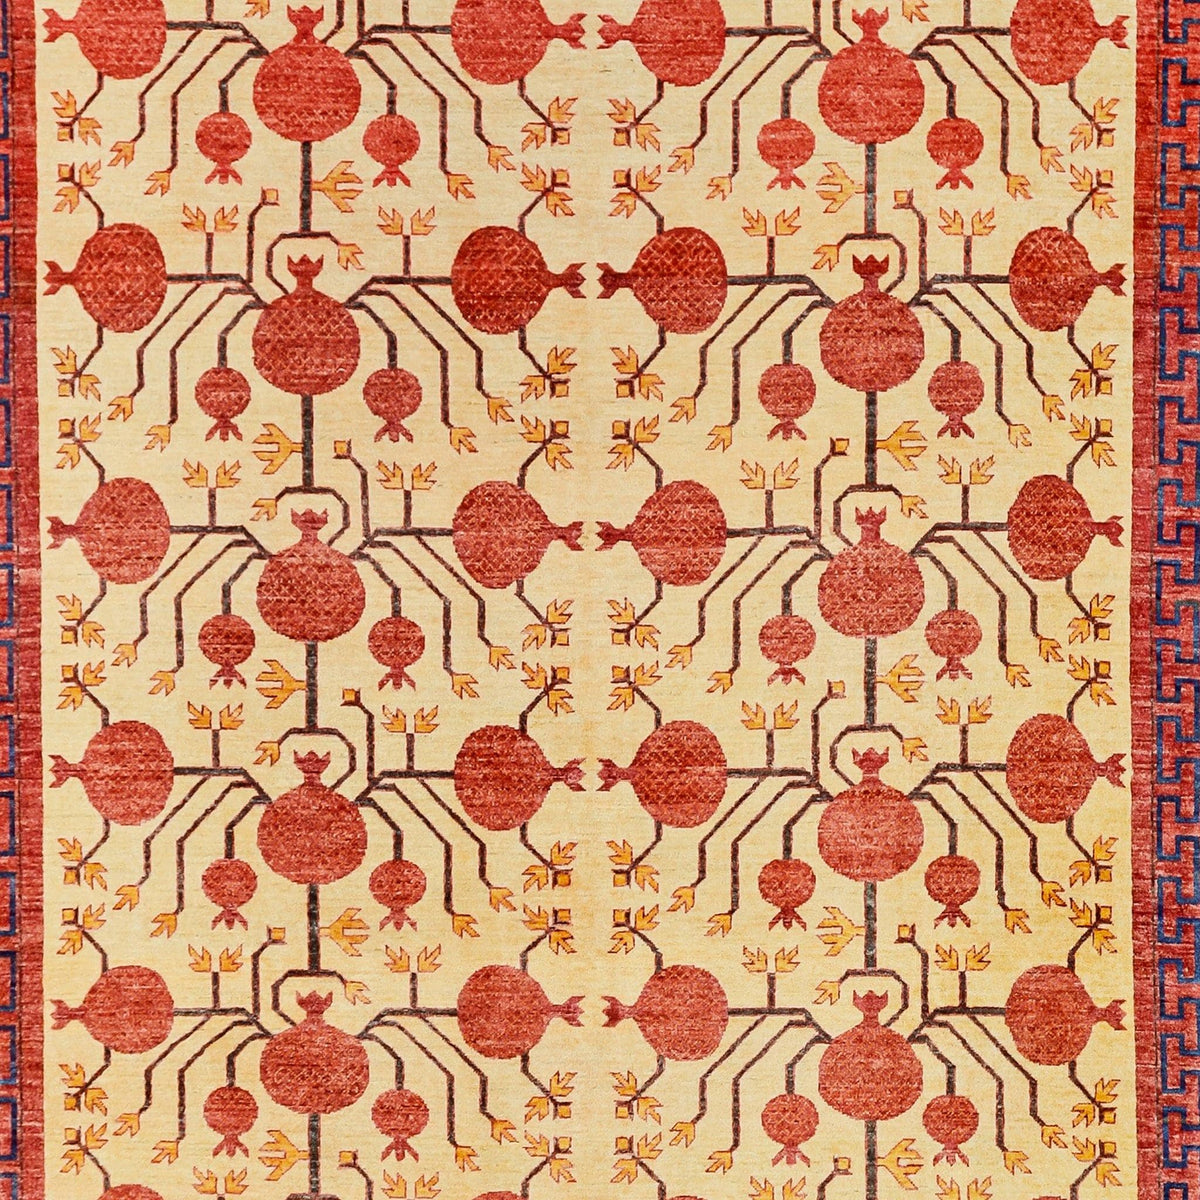 Fine Hand-knotted Tribal Wool Rug 224cm x 329cm